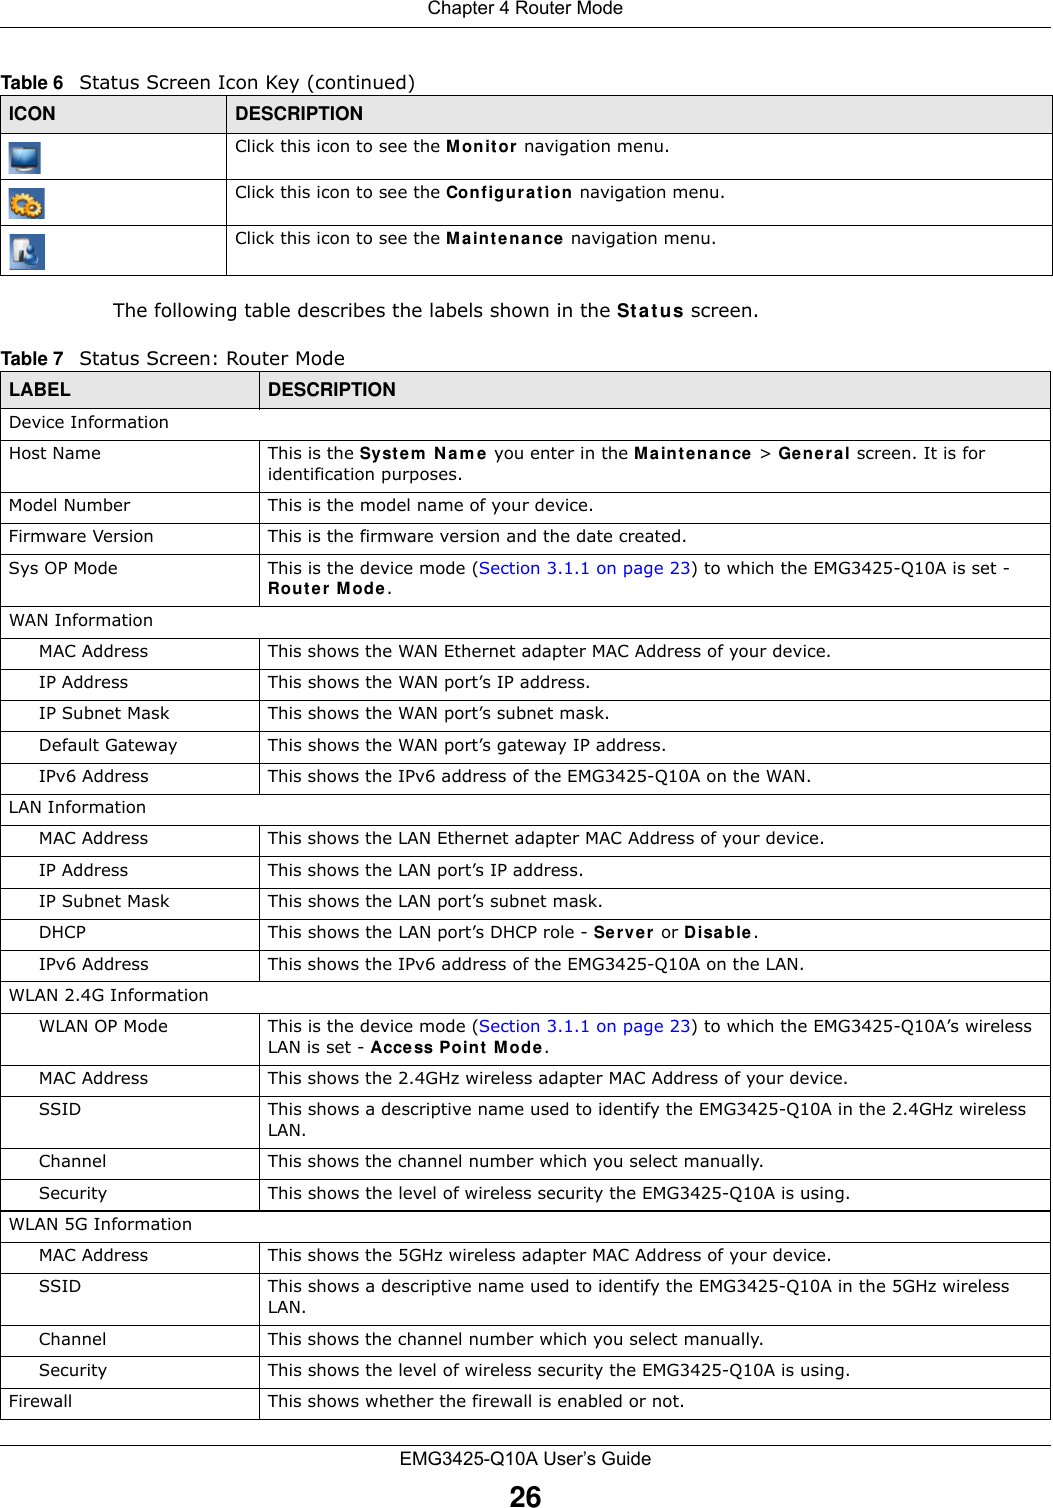 Chapter 4 Router ModeEMG3425-Q10A User’s Guide26The following table describes the labels shown in the St a t us screen.Click this icon to see the M onitor navigation menu. Click this icon to see the Conf igu r a t ion  navigation menu. Click this icon to see the M a in t e na n ce  navigation menu. Table 6   Status Screen Icon Key (continued)ICON DESCRIPTIONTable 7   Status Screen: Router Mode  LABEL DESCRIPTIONDevice InformationHost Name This is the Syst em  N a m e  you enter in the M a int e n a nce  &gt; Ge neral screen. It is for identification purposes.Model Number This is the model name of your device.Firmware Version This is the firmware version and the date created. Sys OP Mode This is the device mode (Section 3.1.1 on page 23) to which the EMG3425-Q10A is set - Rou t e r  M ode .WAN InformationMAC Address This shows the WAN Ethernet adapter MAC Address of your device.IP Address This shows the WAN port’s IP address.IP Subnet Mask This shows the WAN port’s subnet mask.Default Gateway This shows the WAN port’s gateway IP address.IPv6 Address This shows the IPv6 address of the EMG3425-Q10A on the WAN.LAN InformationMAC Address This shows the LAN Ethernet adapter MAC Address of your device.IP Address This shows the LAN port’s IP address.IP Subnet Mask This shows the LAN port’s subnet mask.DHCP This shows the LAN port’s DHCP role - Serve r  or D isable.IPv6 Address This shows the IPv6 address of the EMG3425-Q10A on the LAN.WLAN 2.4G InformationWLAN OP Mode This is the device mode (Section 3.1.1 on page 23) to which the EMG3425-Q10A’s wireless LAN is set - Acce ss Poin t  M ode .MAC Address This shows the 2.4GHz wireless adapter MAC Address of your device.SSID This shows a descriptive name used to identify the EMG3425-Q10A in the 2.4GHz wireless LAN. Channel This shows the channel number which you select manually.Security This shows the level of wireless security the EMG3425-Q10A is using.WLAN 5G InformationMAC Address This shows the 5GHz wireless adapter MAC Address of your device.SSID This shows a descriptive name used to identify the EMG3425-Q10A in the 5GHz wireless LAN. Channel This shows the channel number which you select manually.Security This shows the level of wireless security the EMG3425-Q10A is using.Firewall This shows whether the firewall is enabled or not.